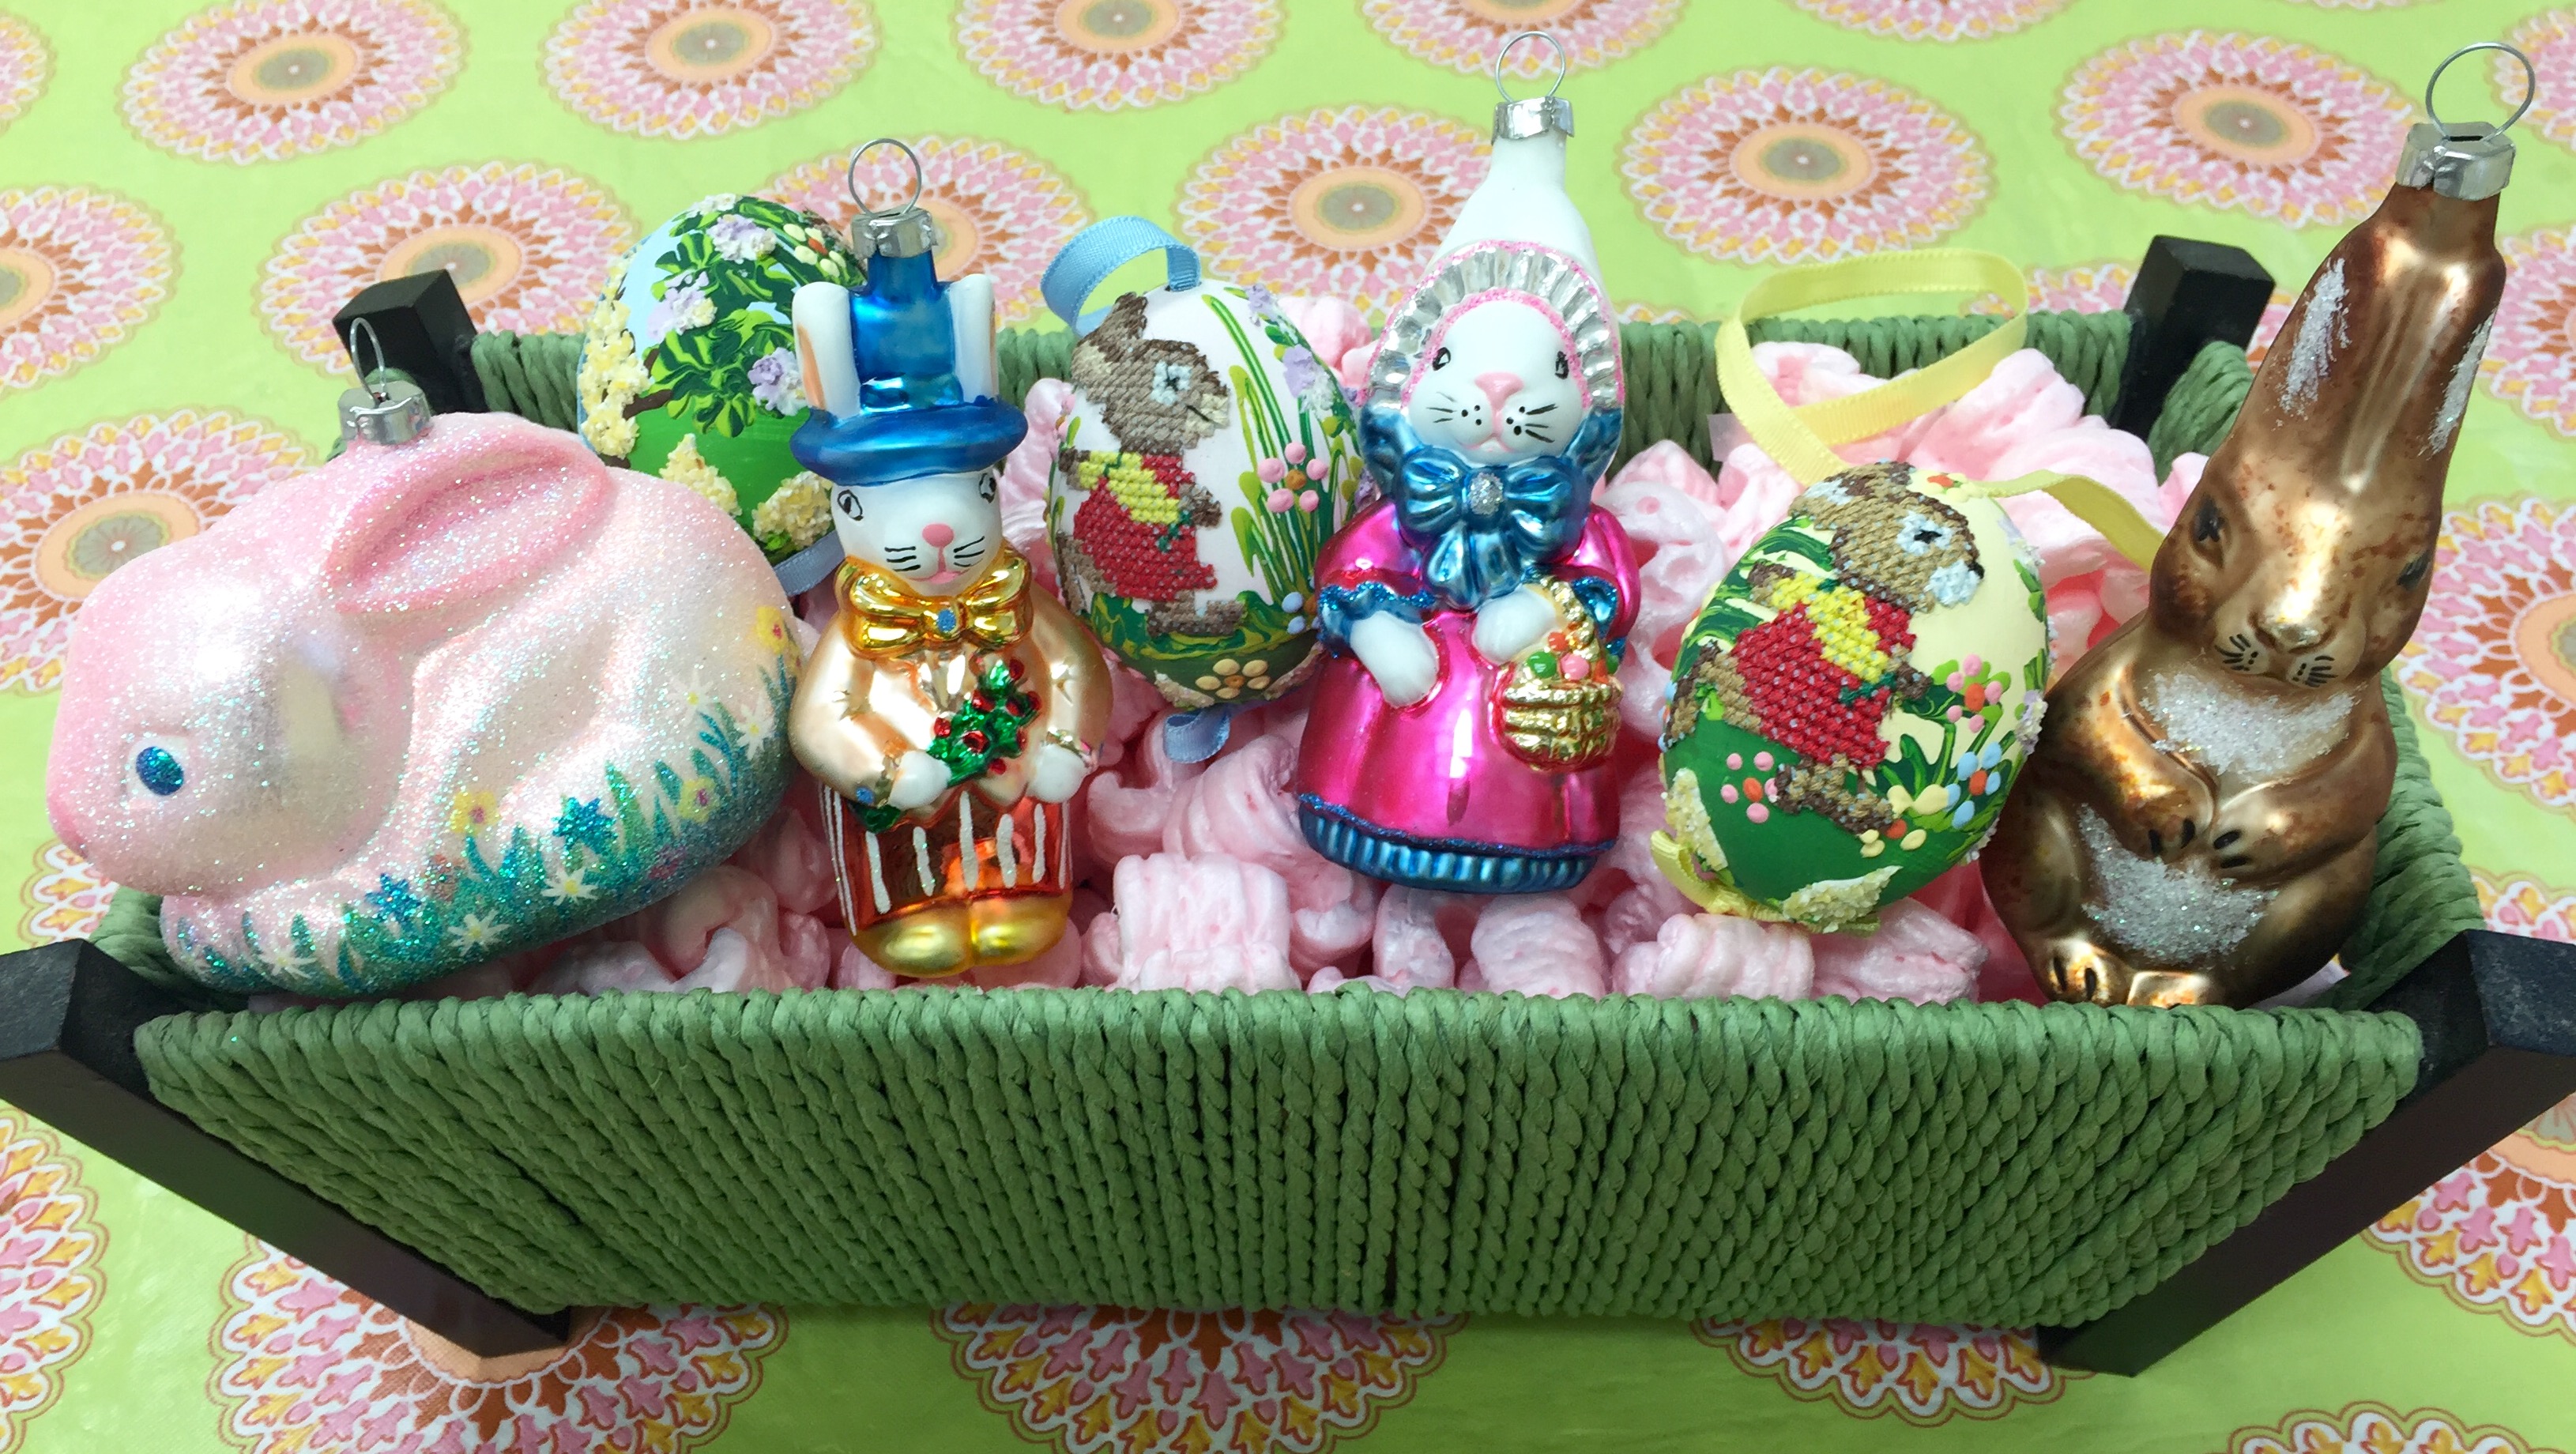 A basket full of Easter ornaments contains a pink sparkled bunny, a colorful bunny couple, a set of 3 needle point egg ornaments, and a brown forest bunny ornament | OrnamentShop.com